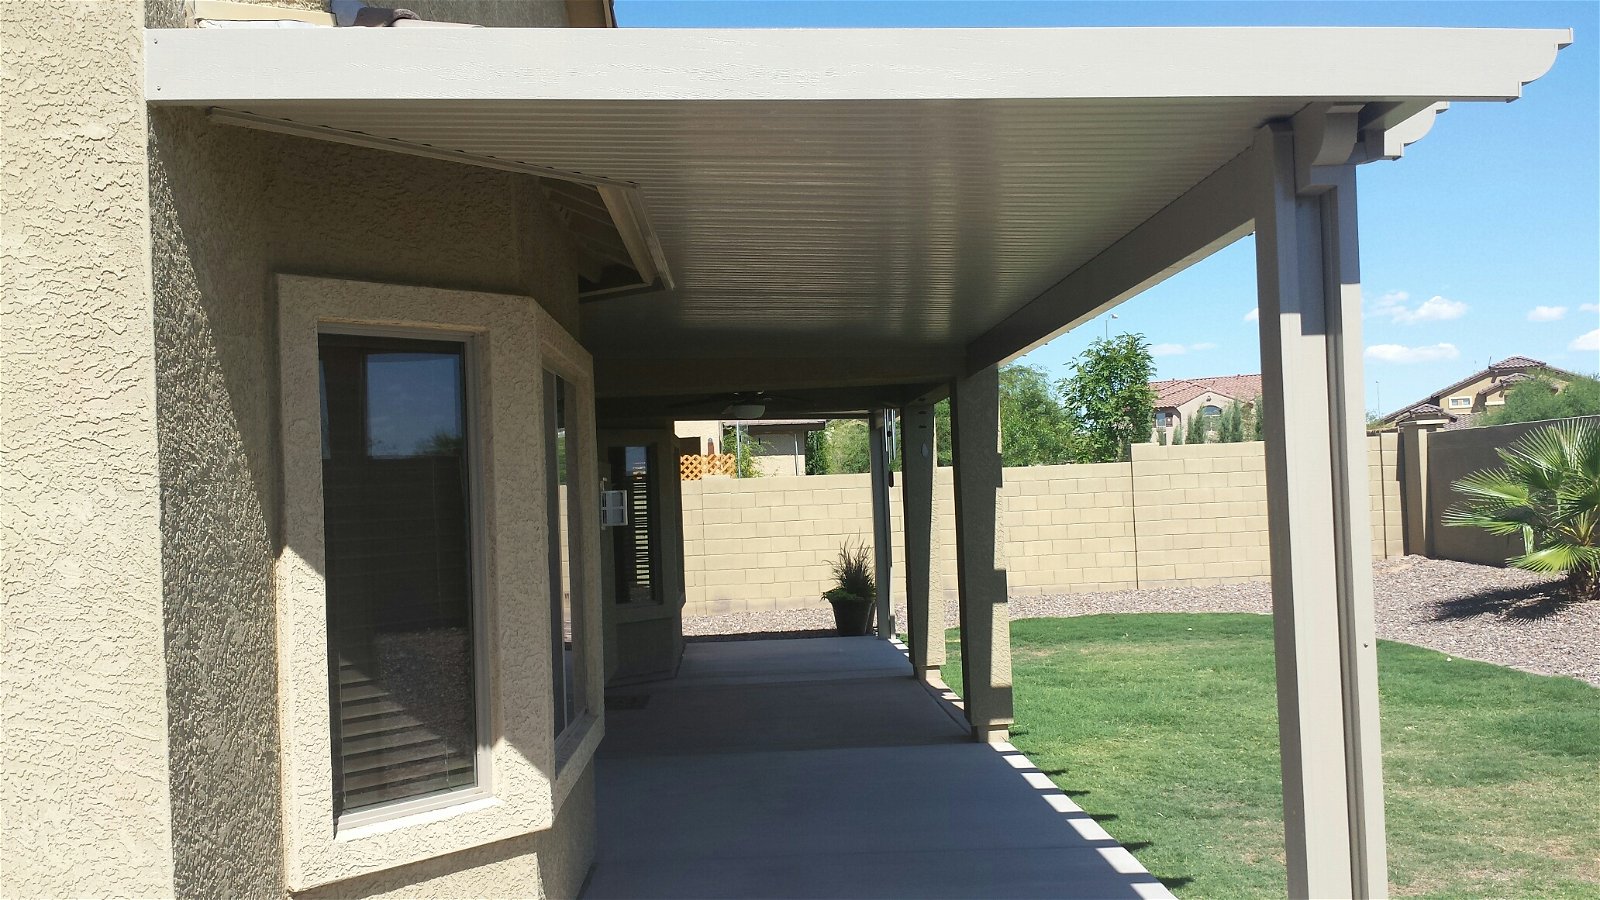 Patio Covers in Scottsdale: Outdoor Living at Its Finest